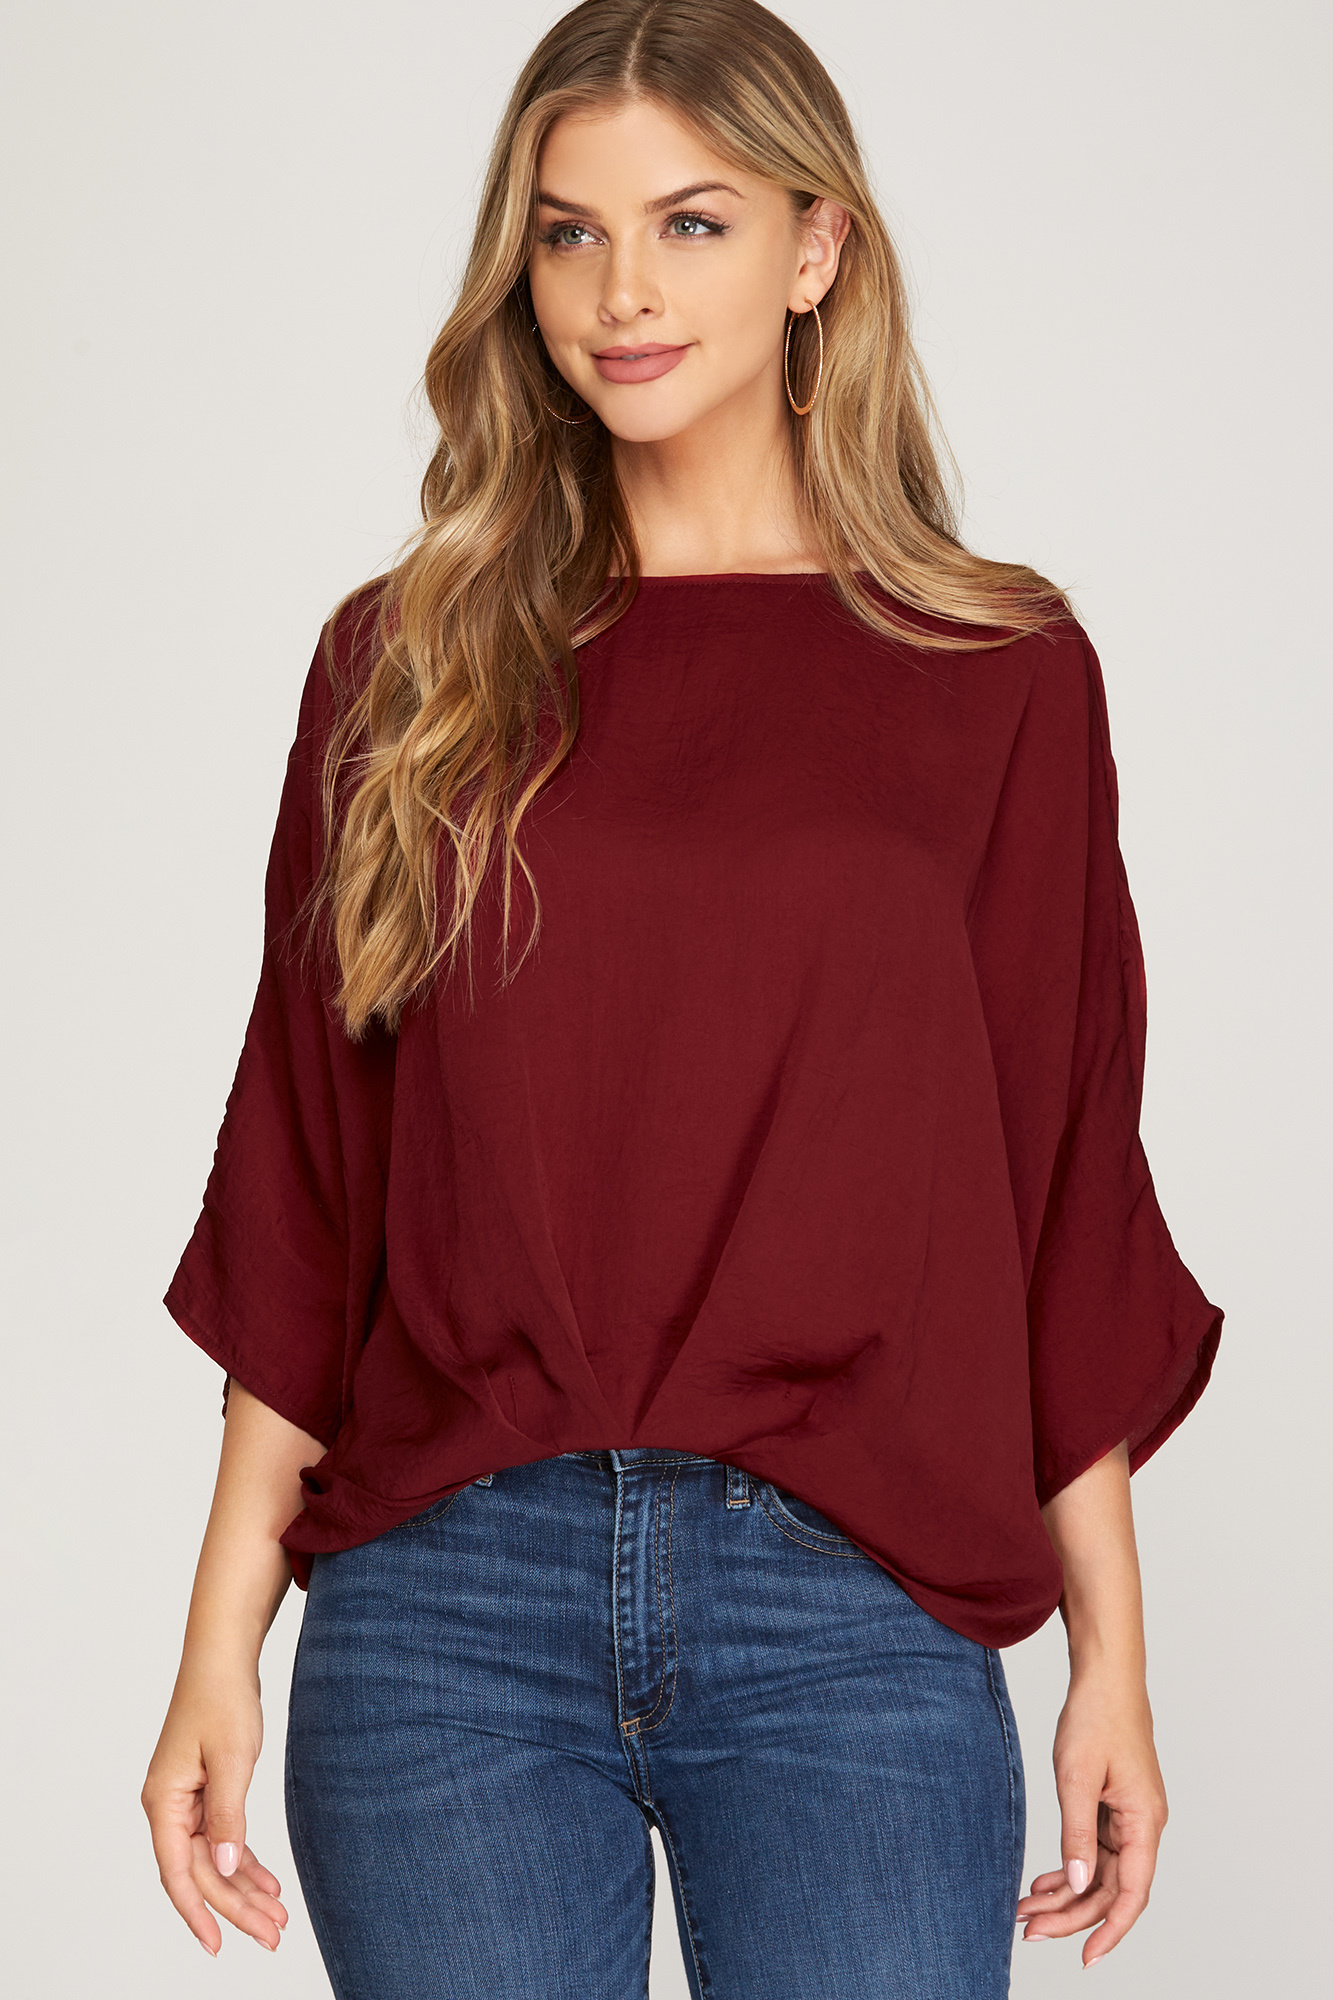 She & Sky 3/4 Batwing Slv Pleated Top